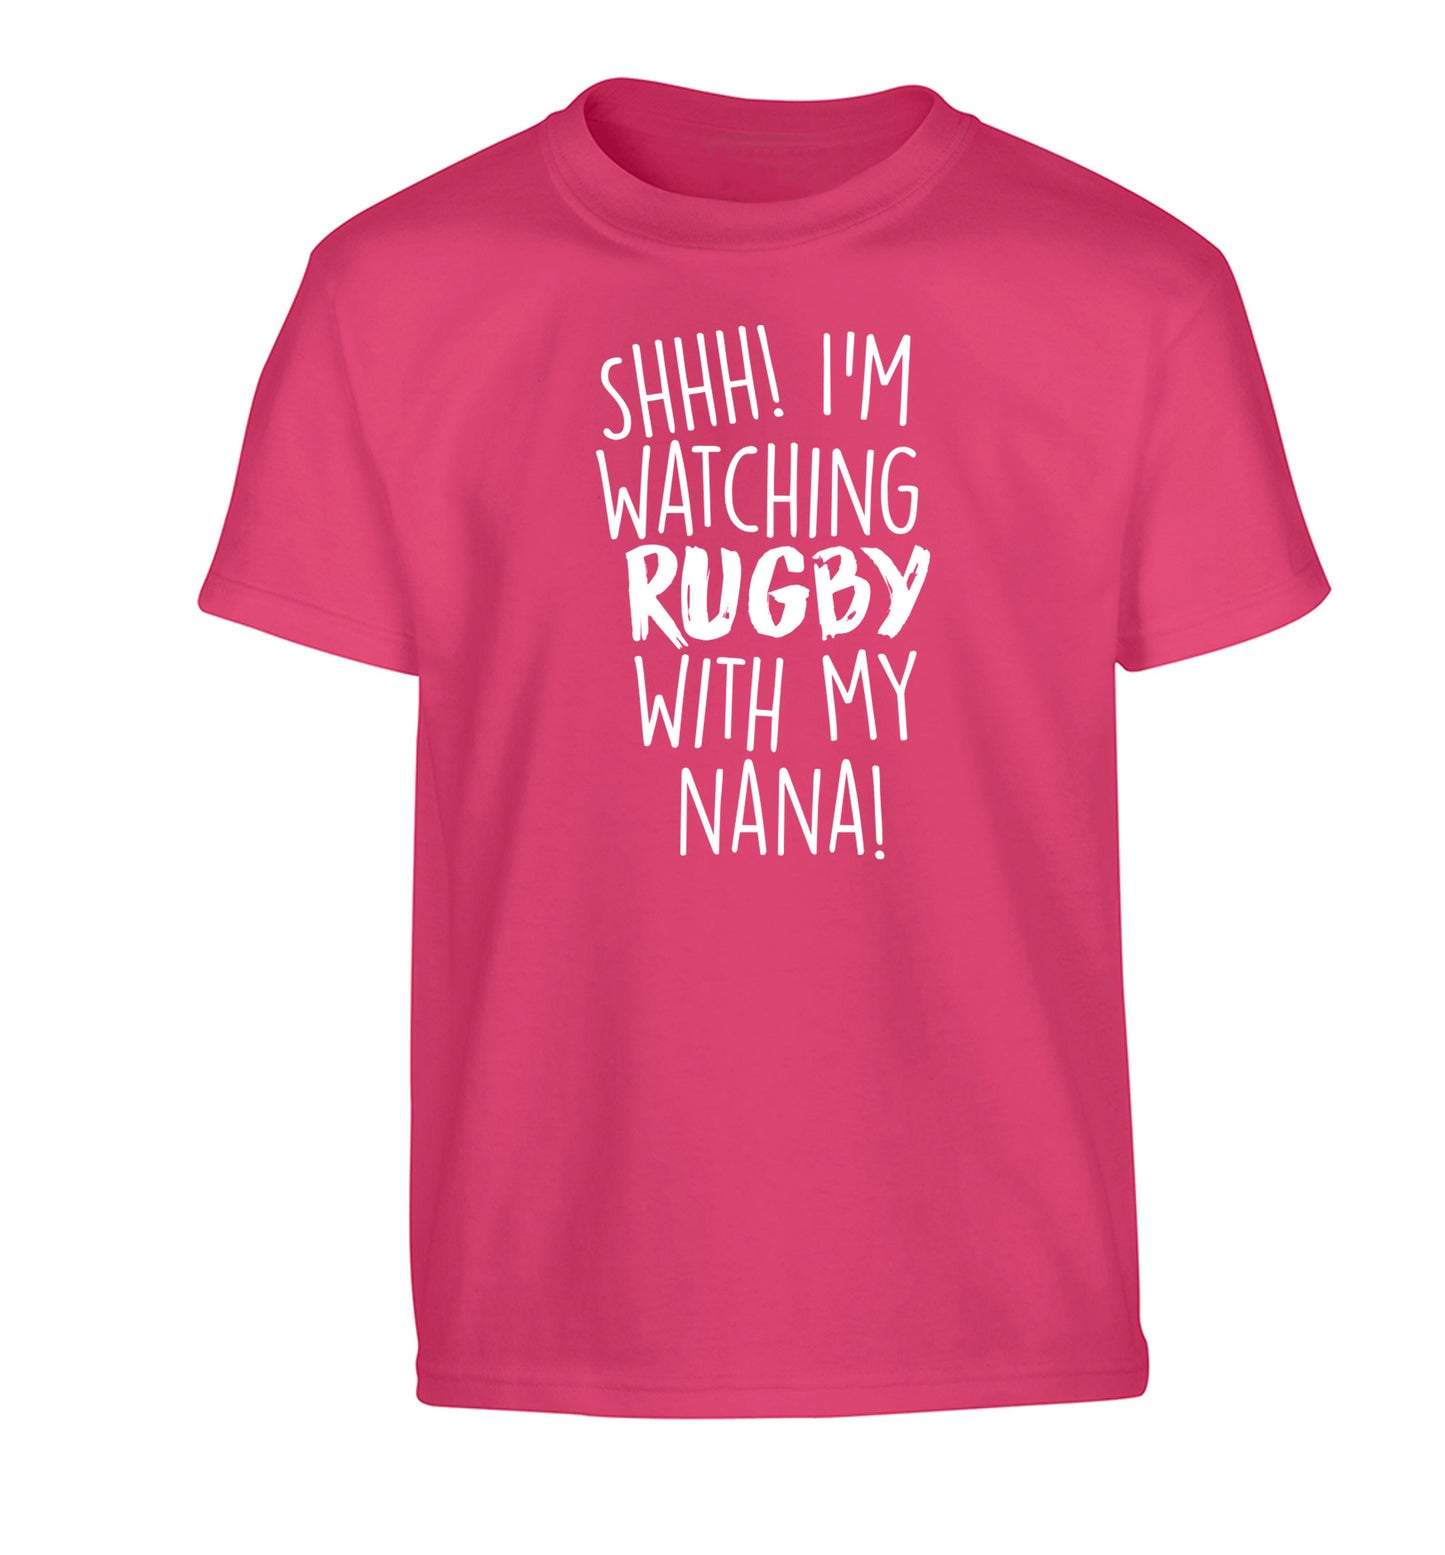 Shh I'm watching rugby with my nana Children's pink Tshirt 12-13 Years